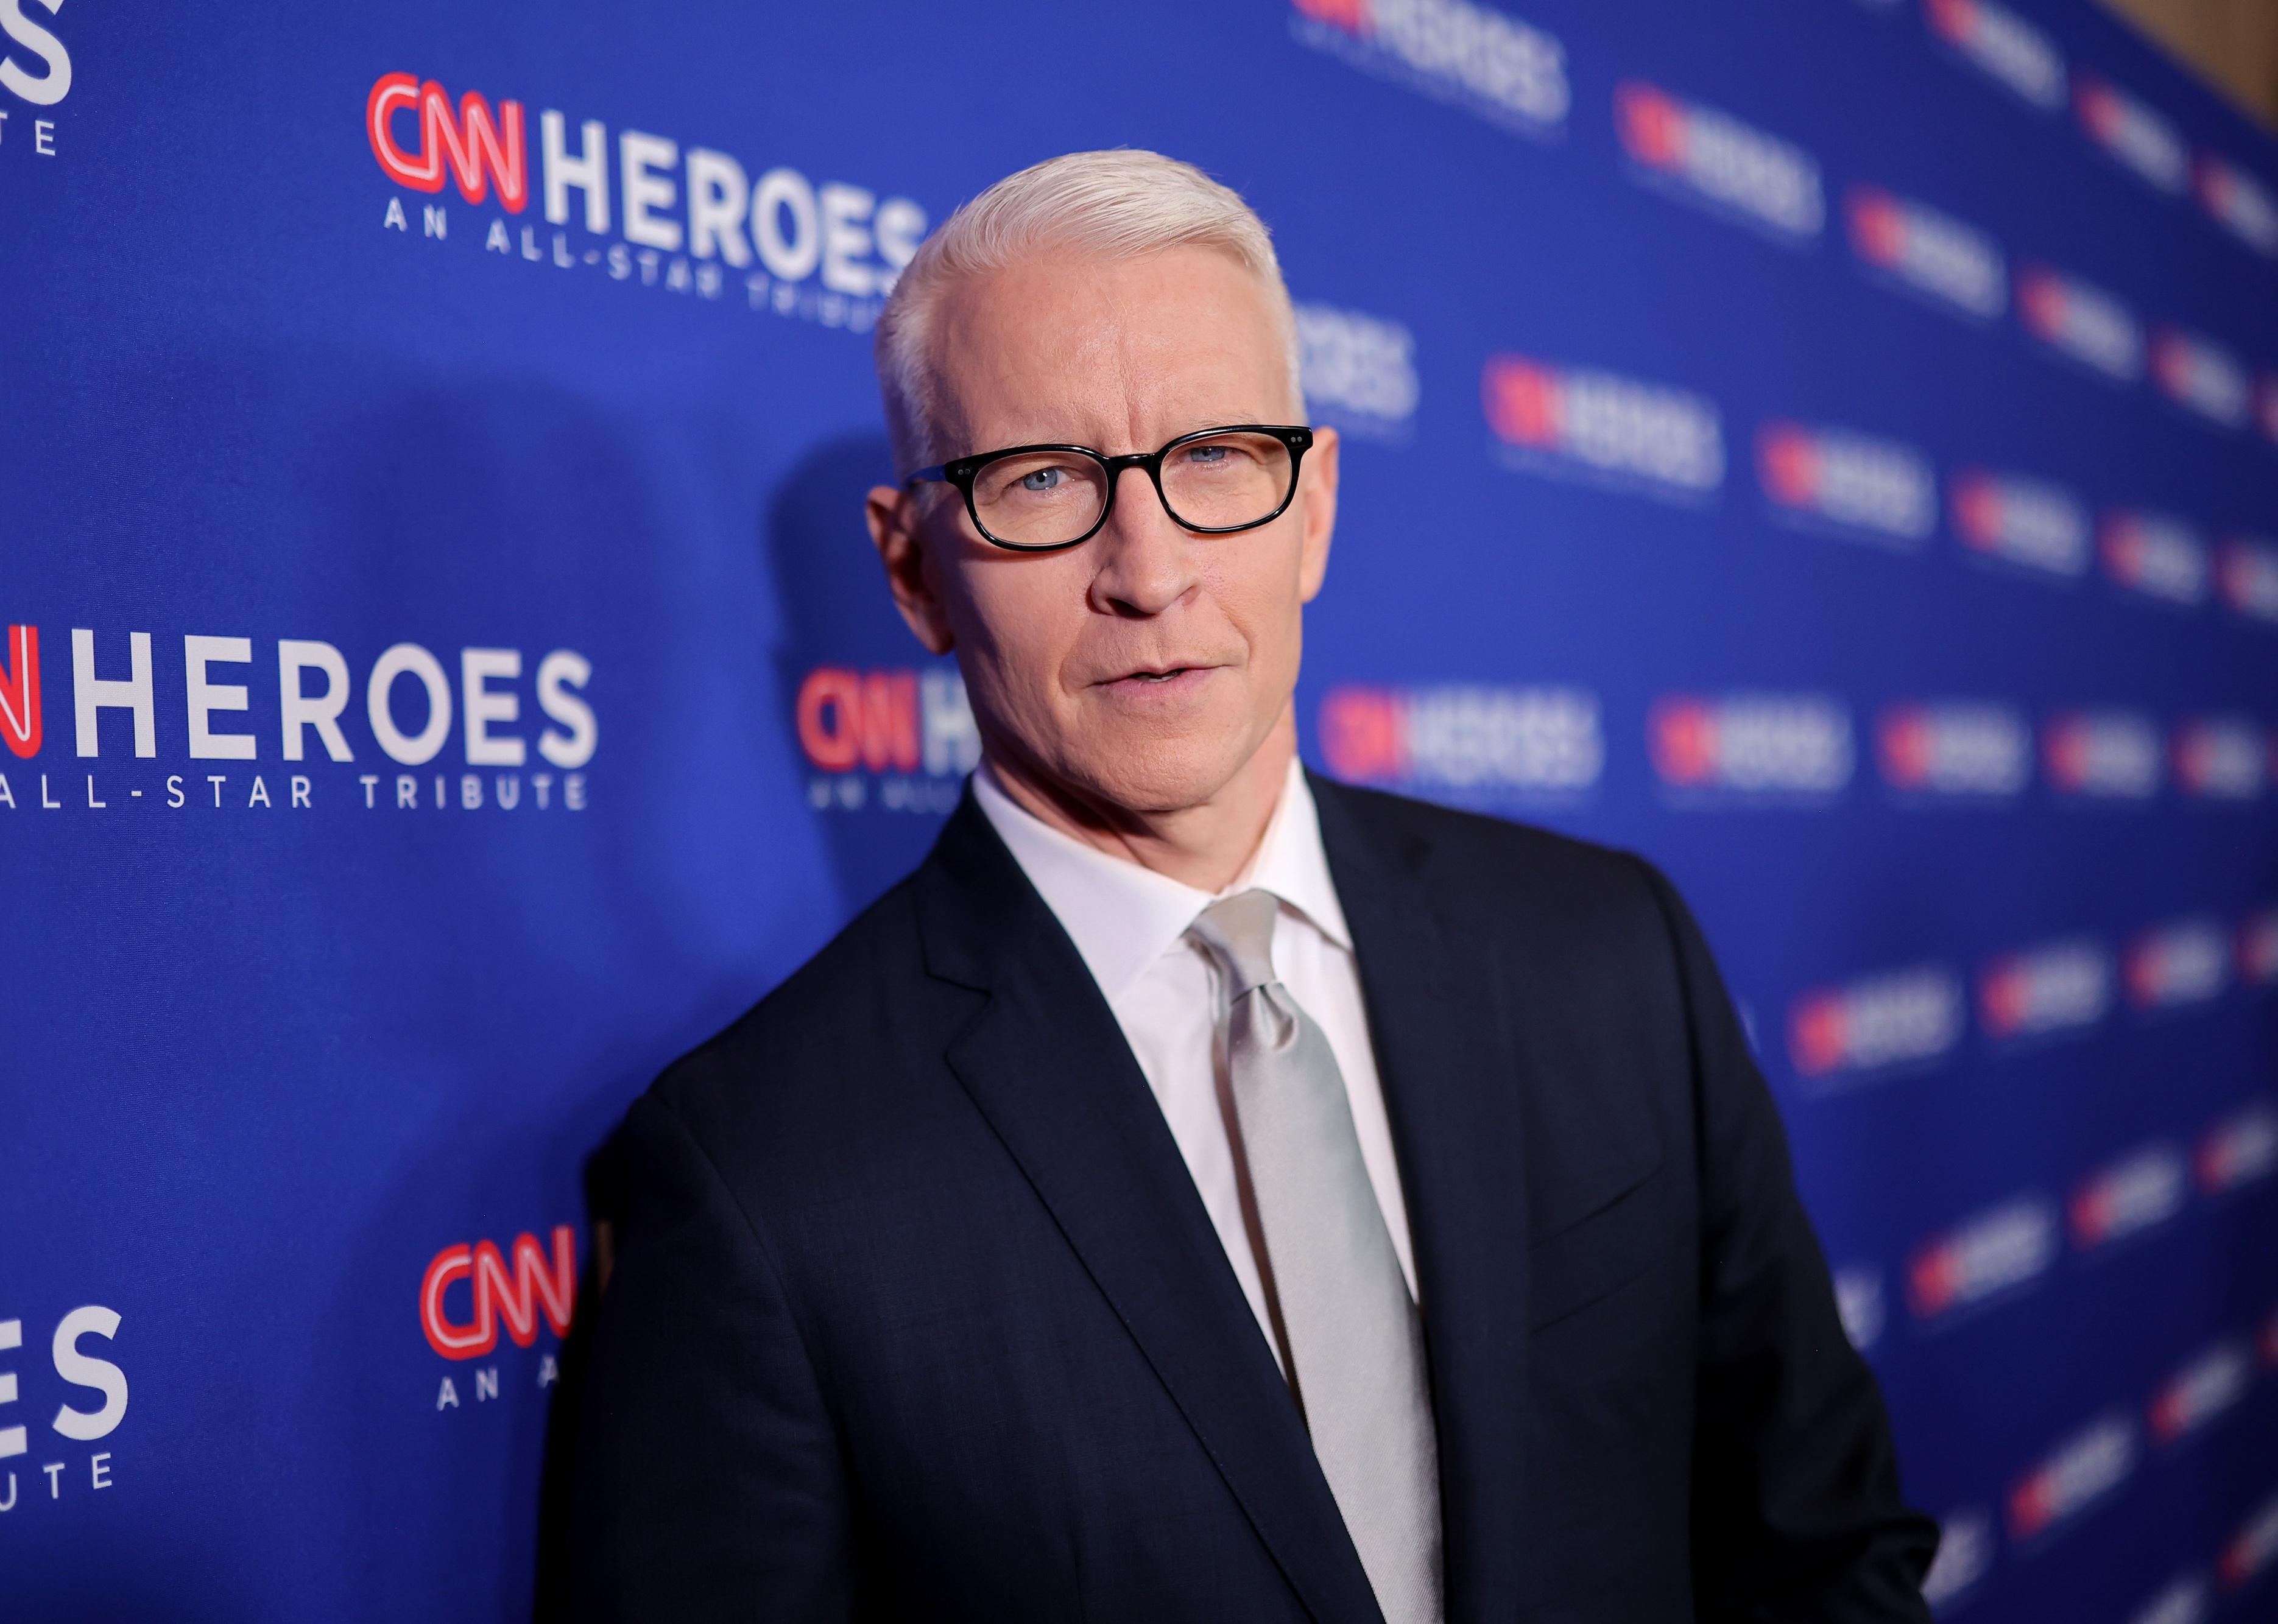 Anderson Cooper attends the 16th annual CNN Heroes: An All-Star Tribute.